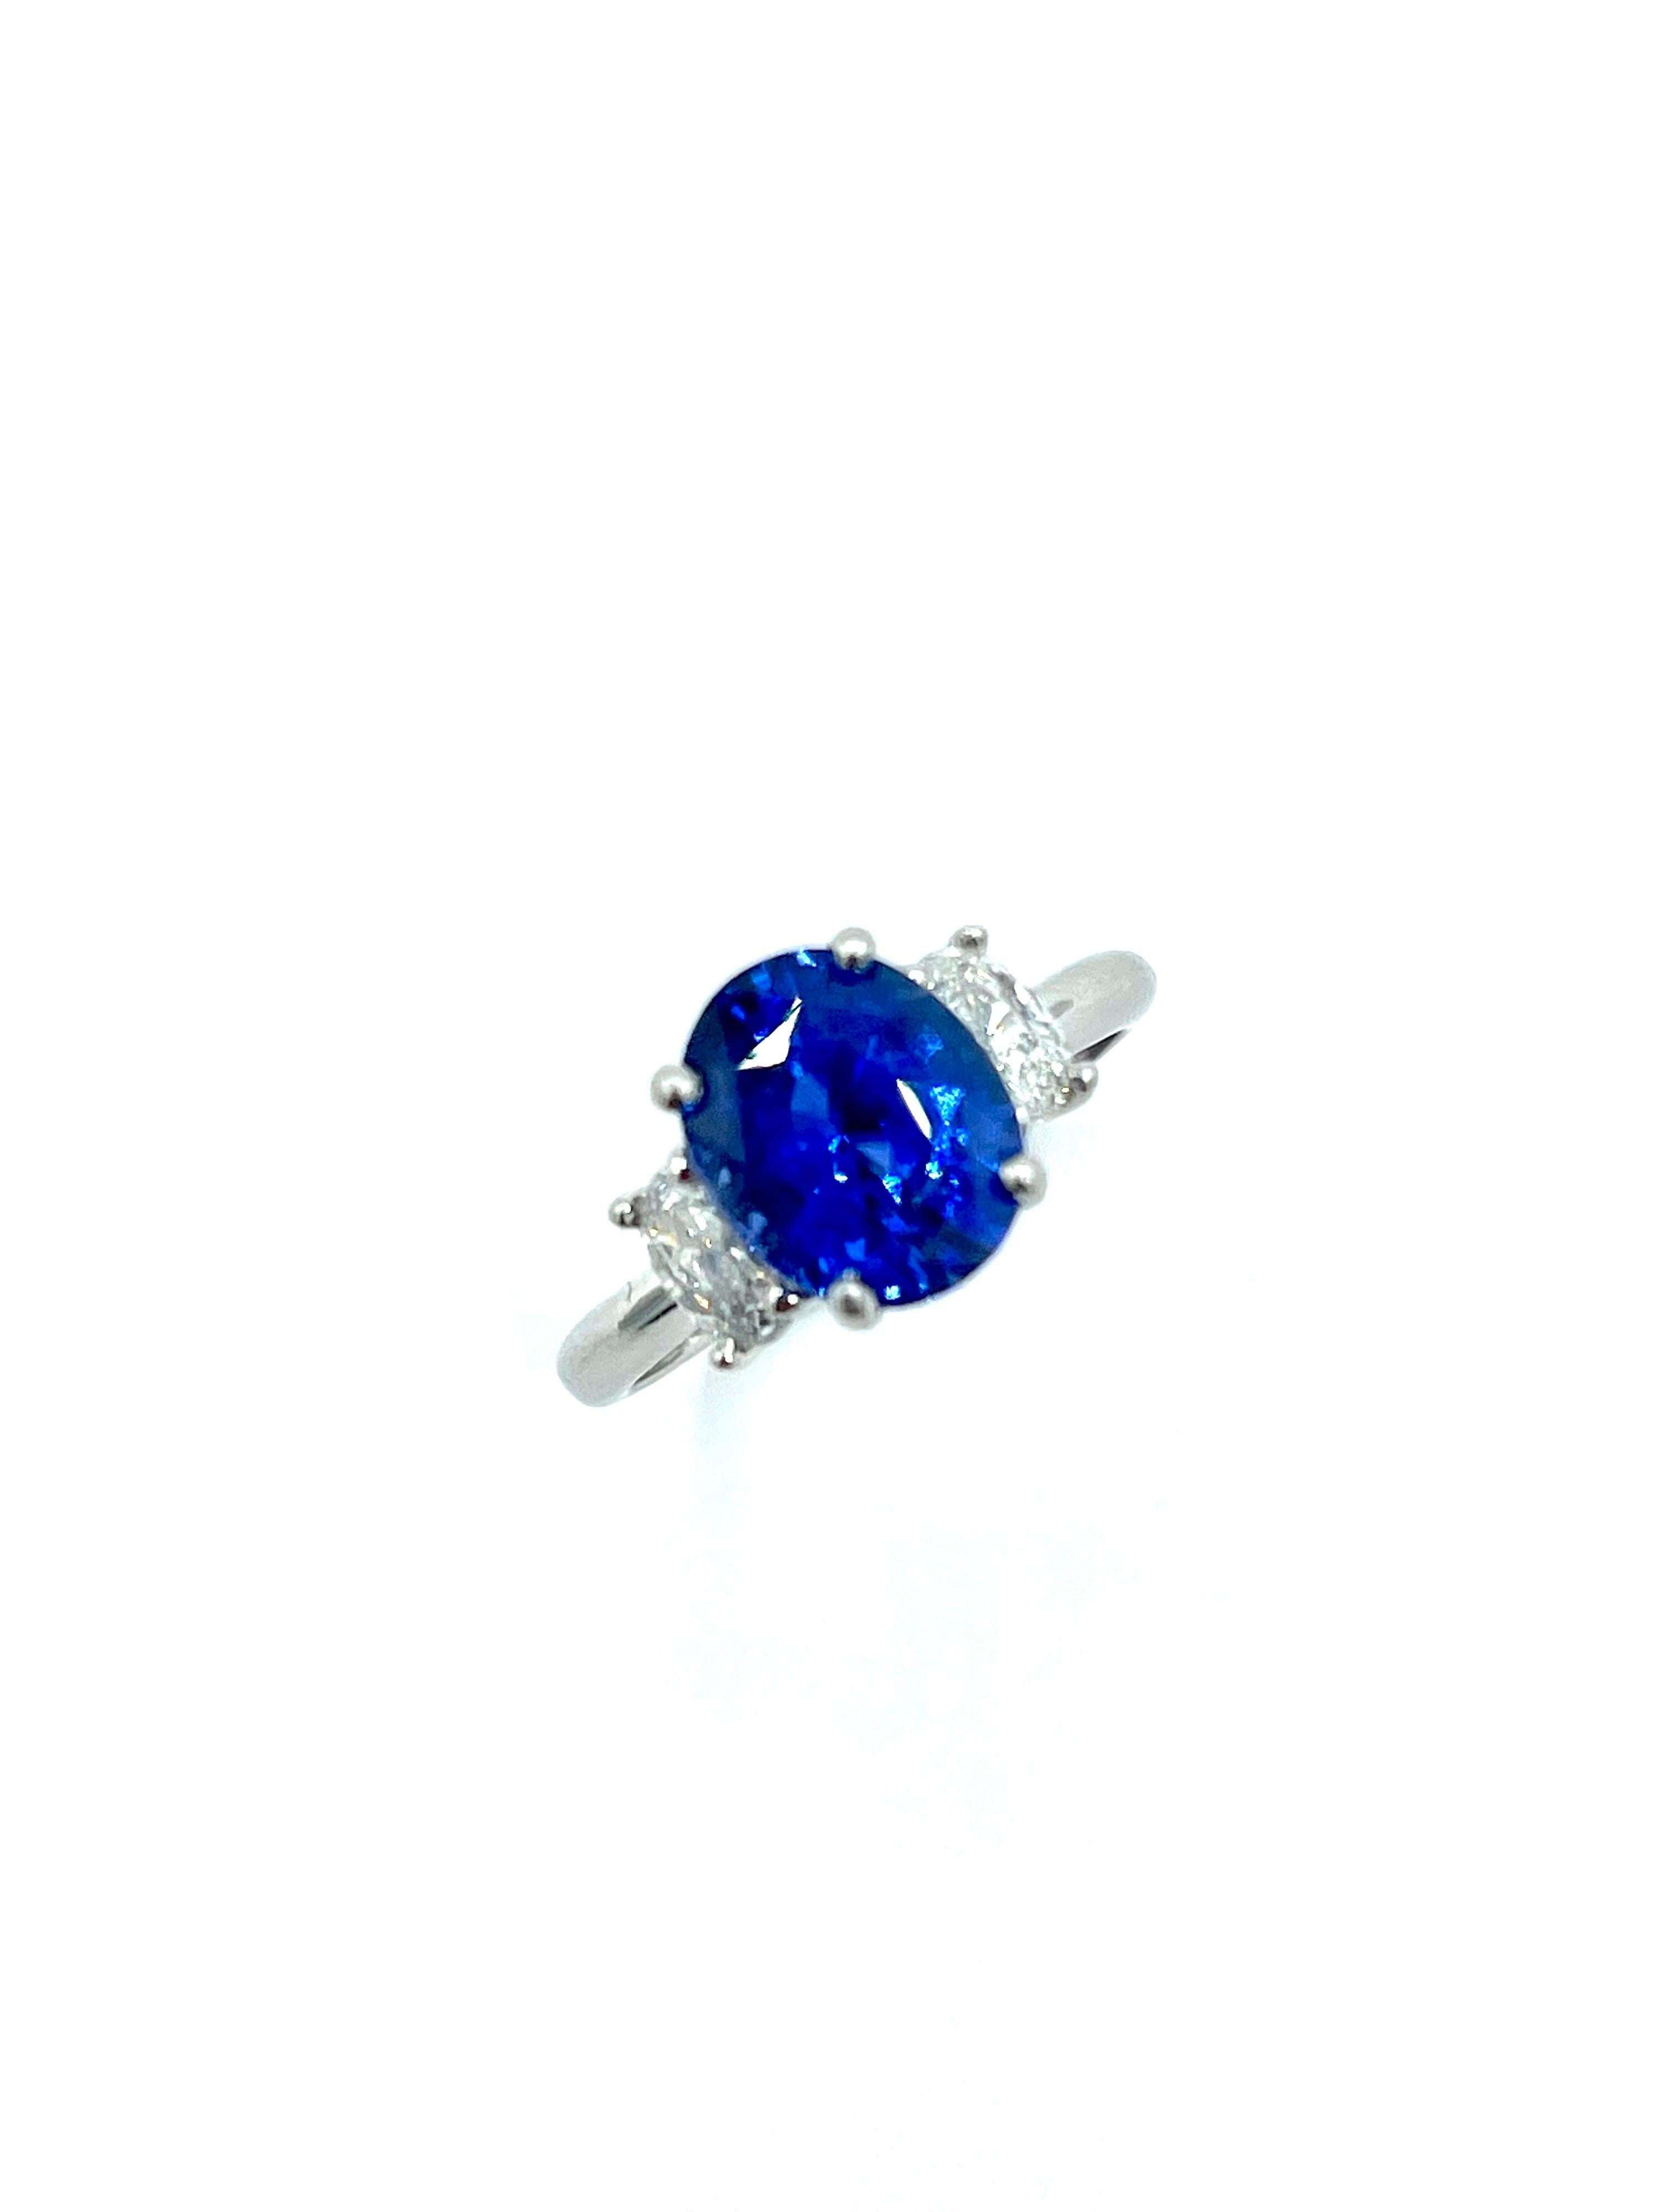 Simple and beautiful!  This ring will get lots of wear.  the 3.60 carat Sapphire is set with four prongs an a platinum basket setting with a single oval brilliant Diamond on each side.  The Sapphire displays amazing color and brilliance.  The two